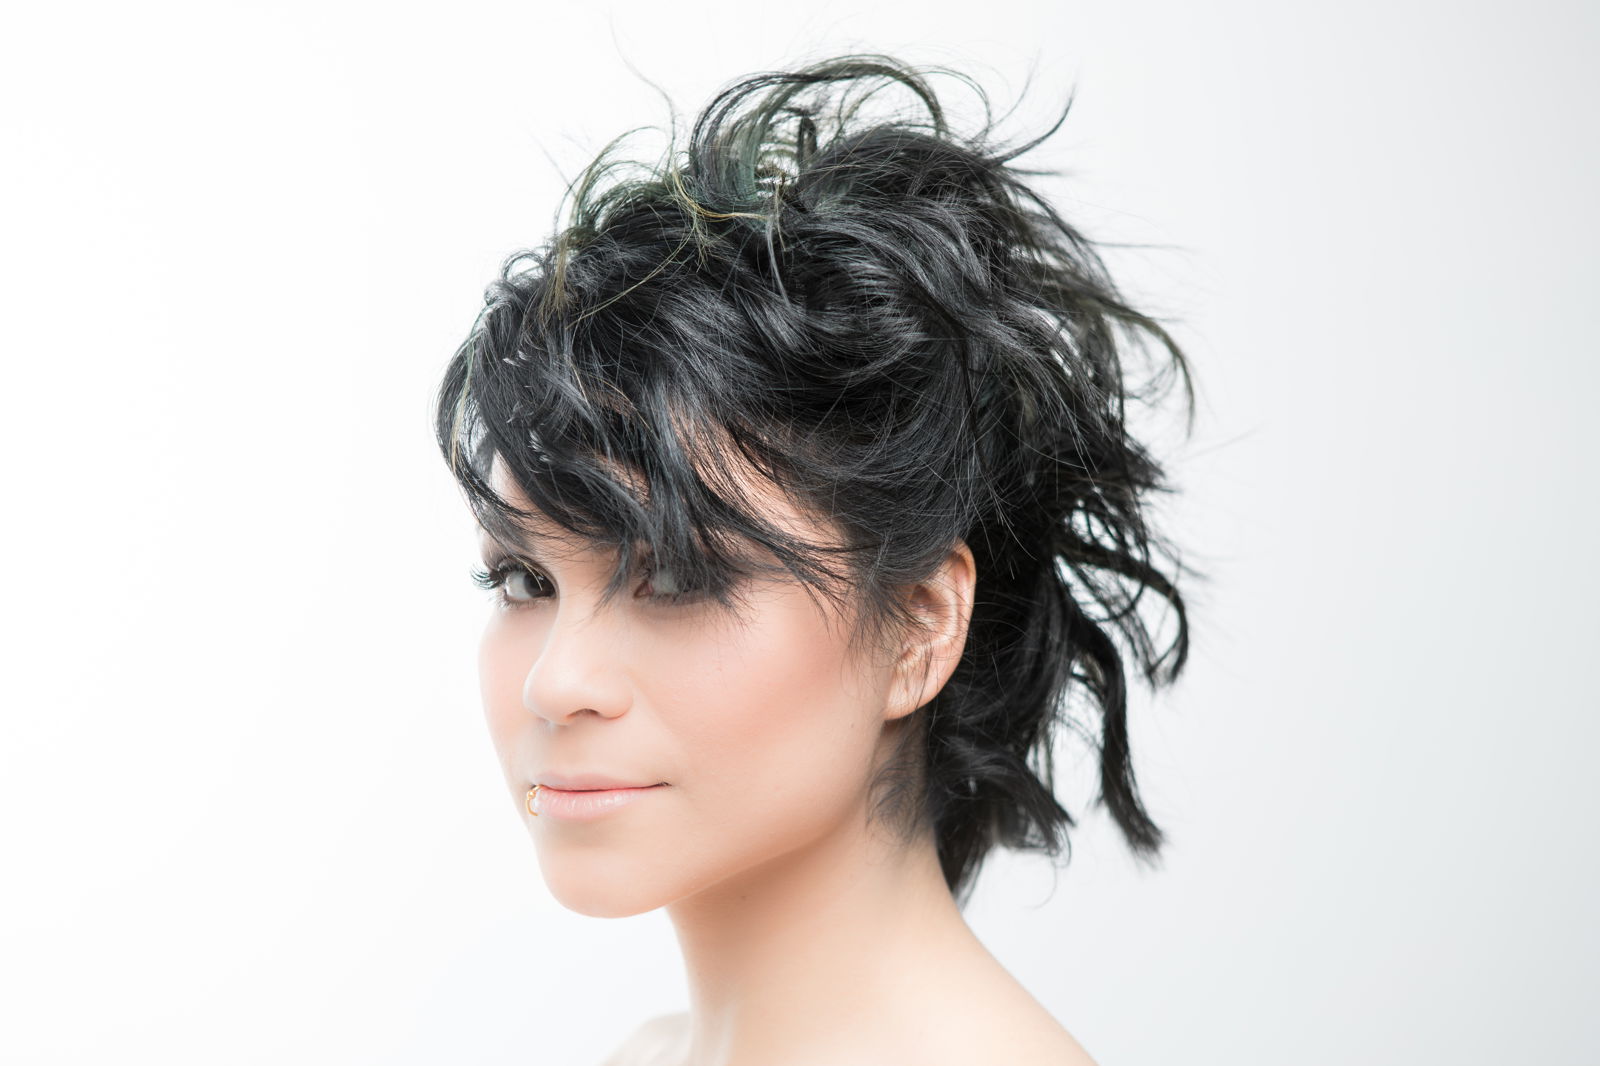 Tousled updo with a bob